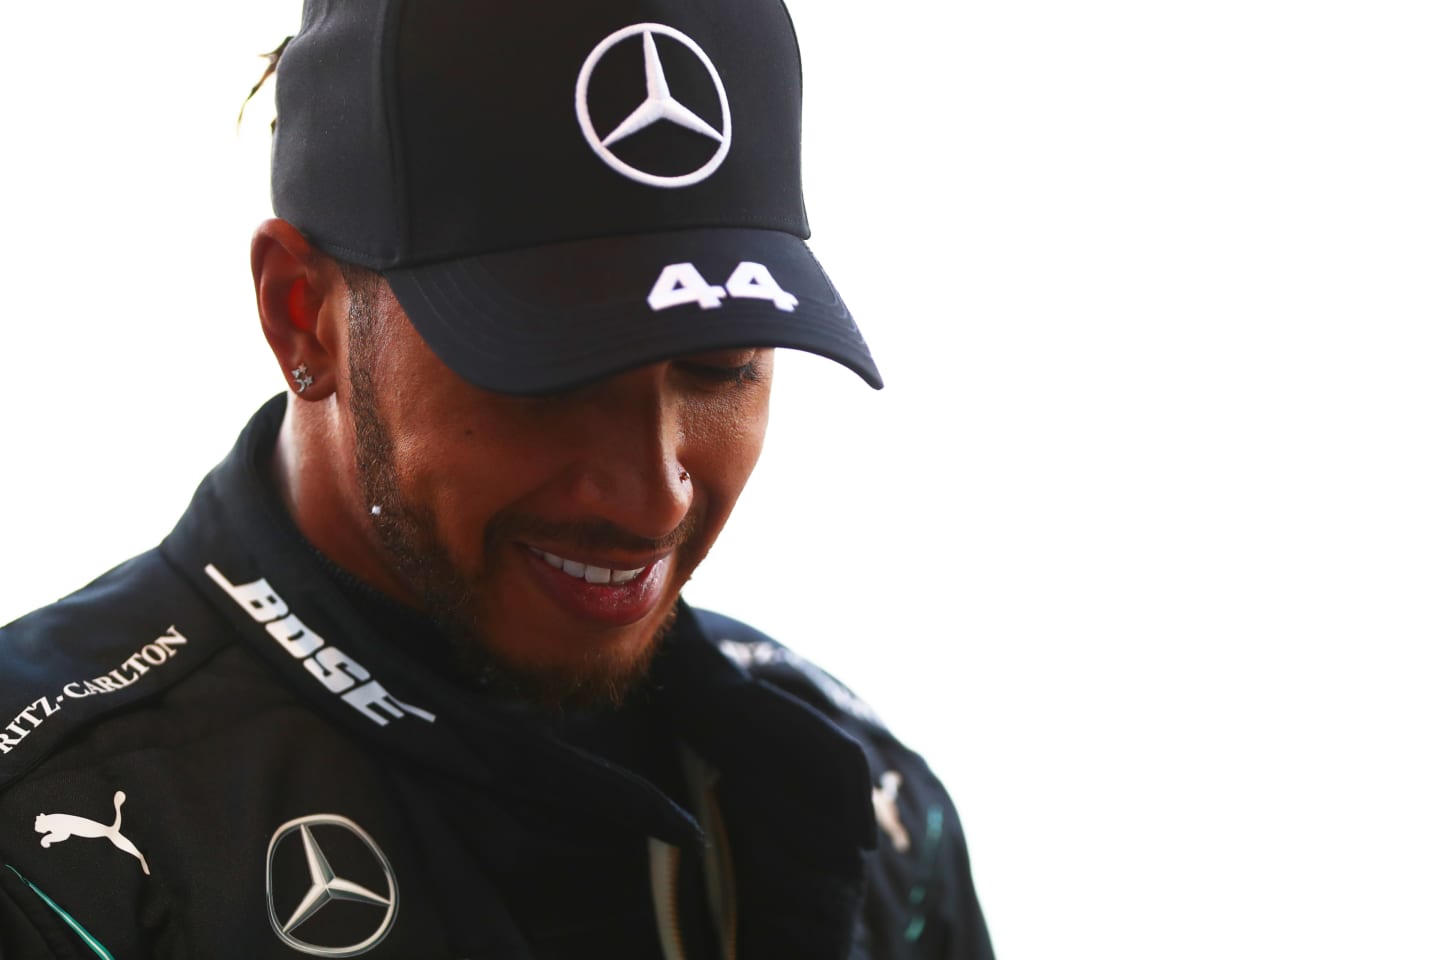 SOCHI, RUSSIA - SEPTEMBER 26: Lewis Hamilton of Great Britain and Mercedes GP smiles in parc ferme after claiming pole position during qualifying ahead of the F1 Grand Prix of Russia at Sochi Autodrom on September 26, 2020 in Sochi, Russia. (Photo by Dan Istitene - Formula 1/Formula 1 via Getty Images)